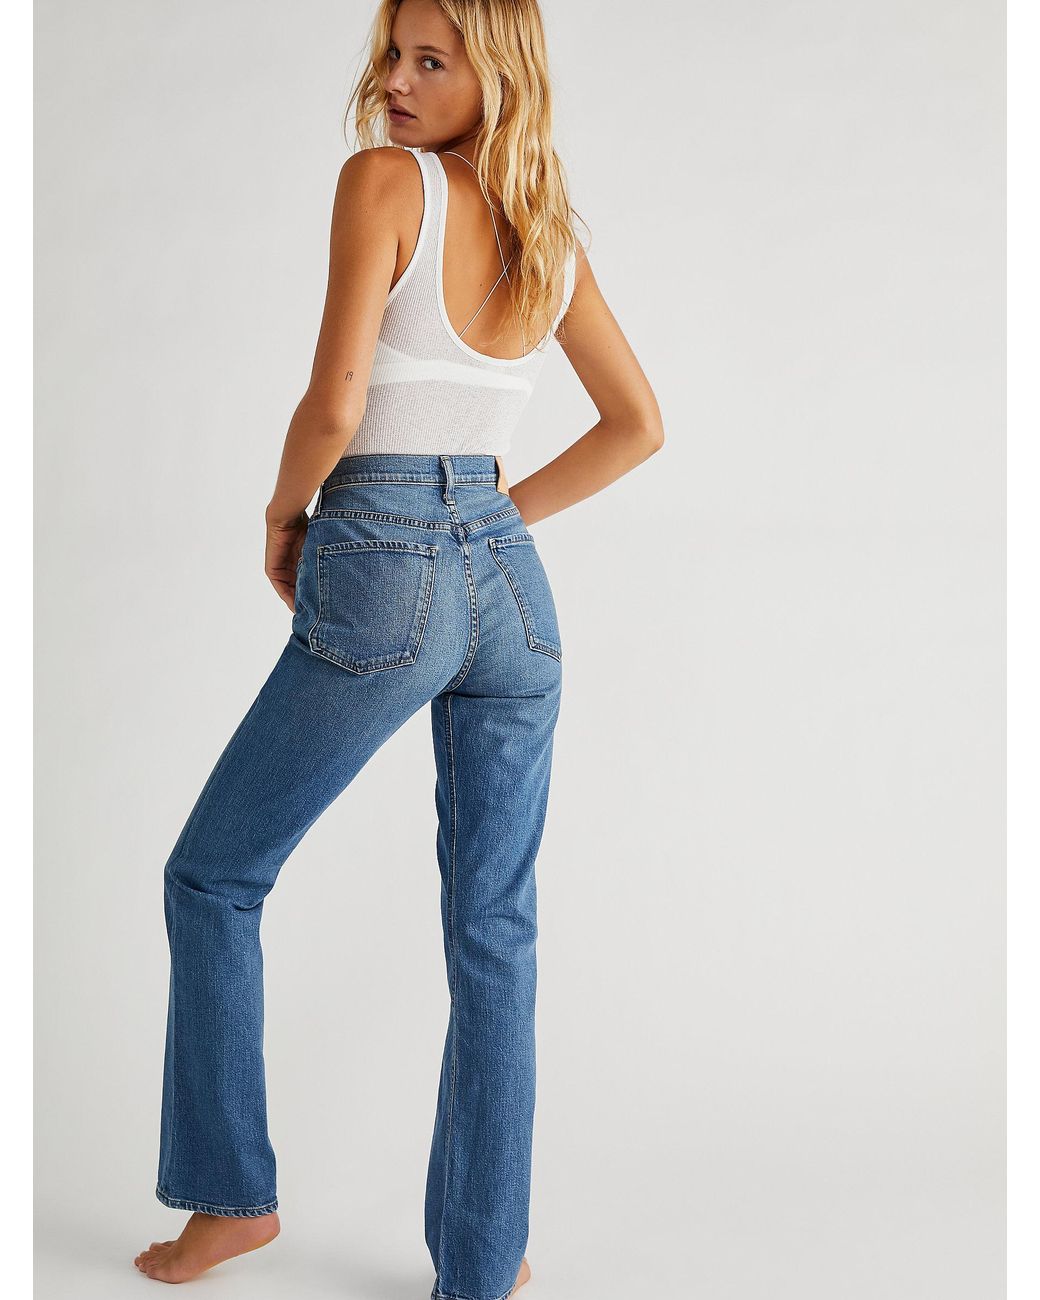 Free People Citizens Of Humanity Libby Relaxed Bootcut Jeans in Blue | Lyst  Canada